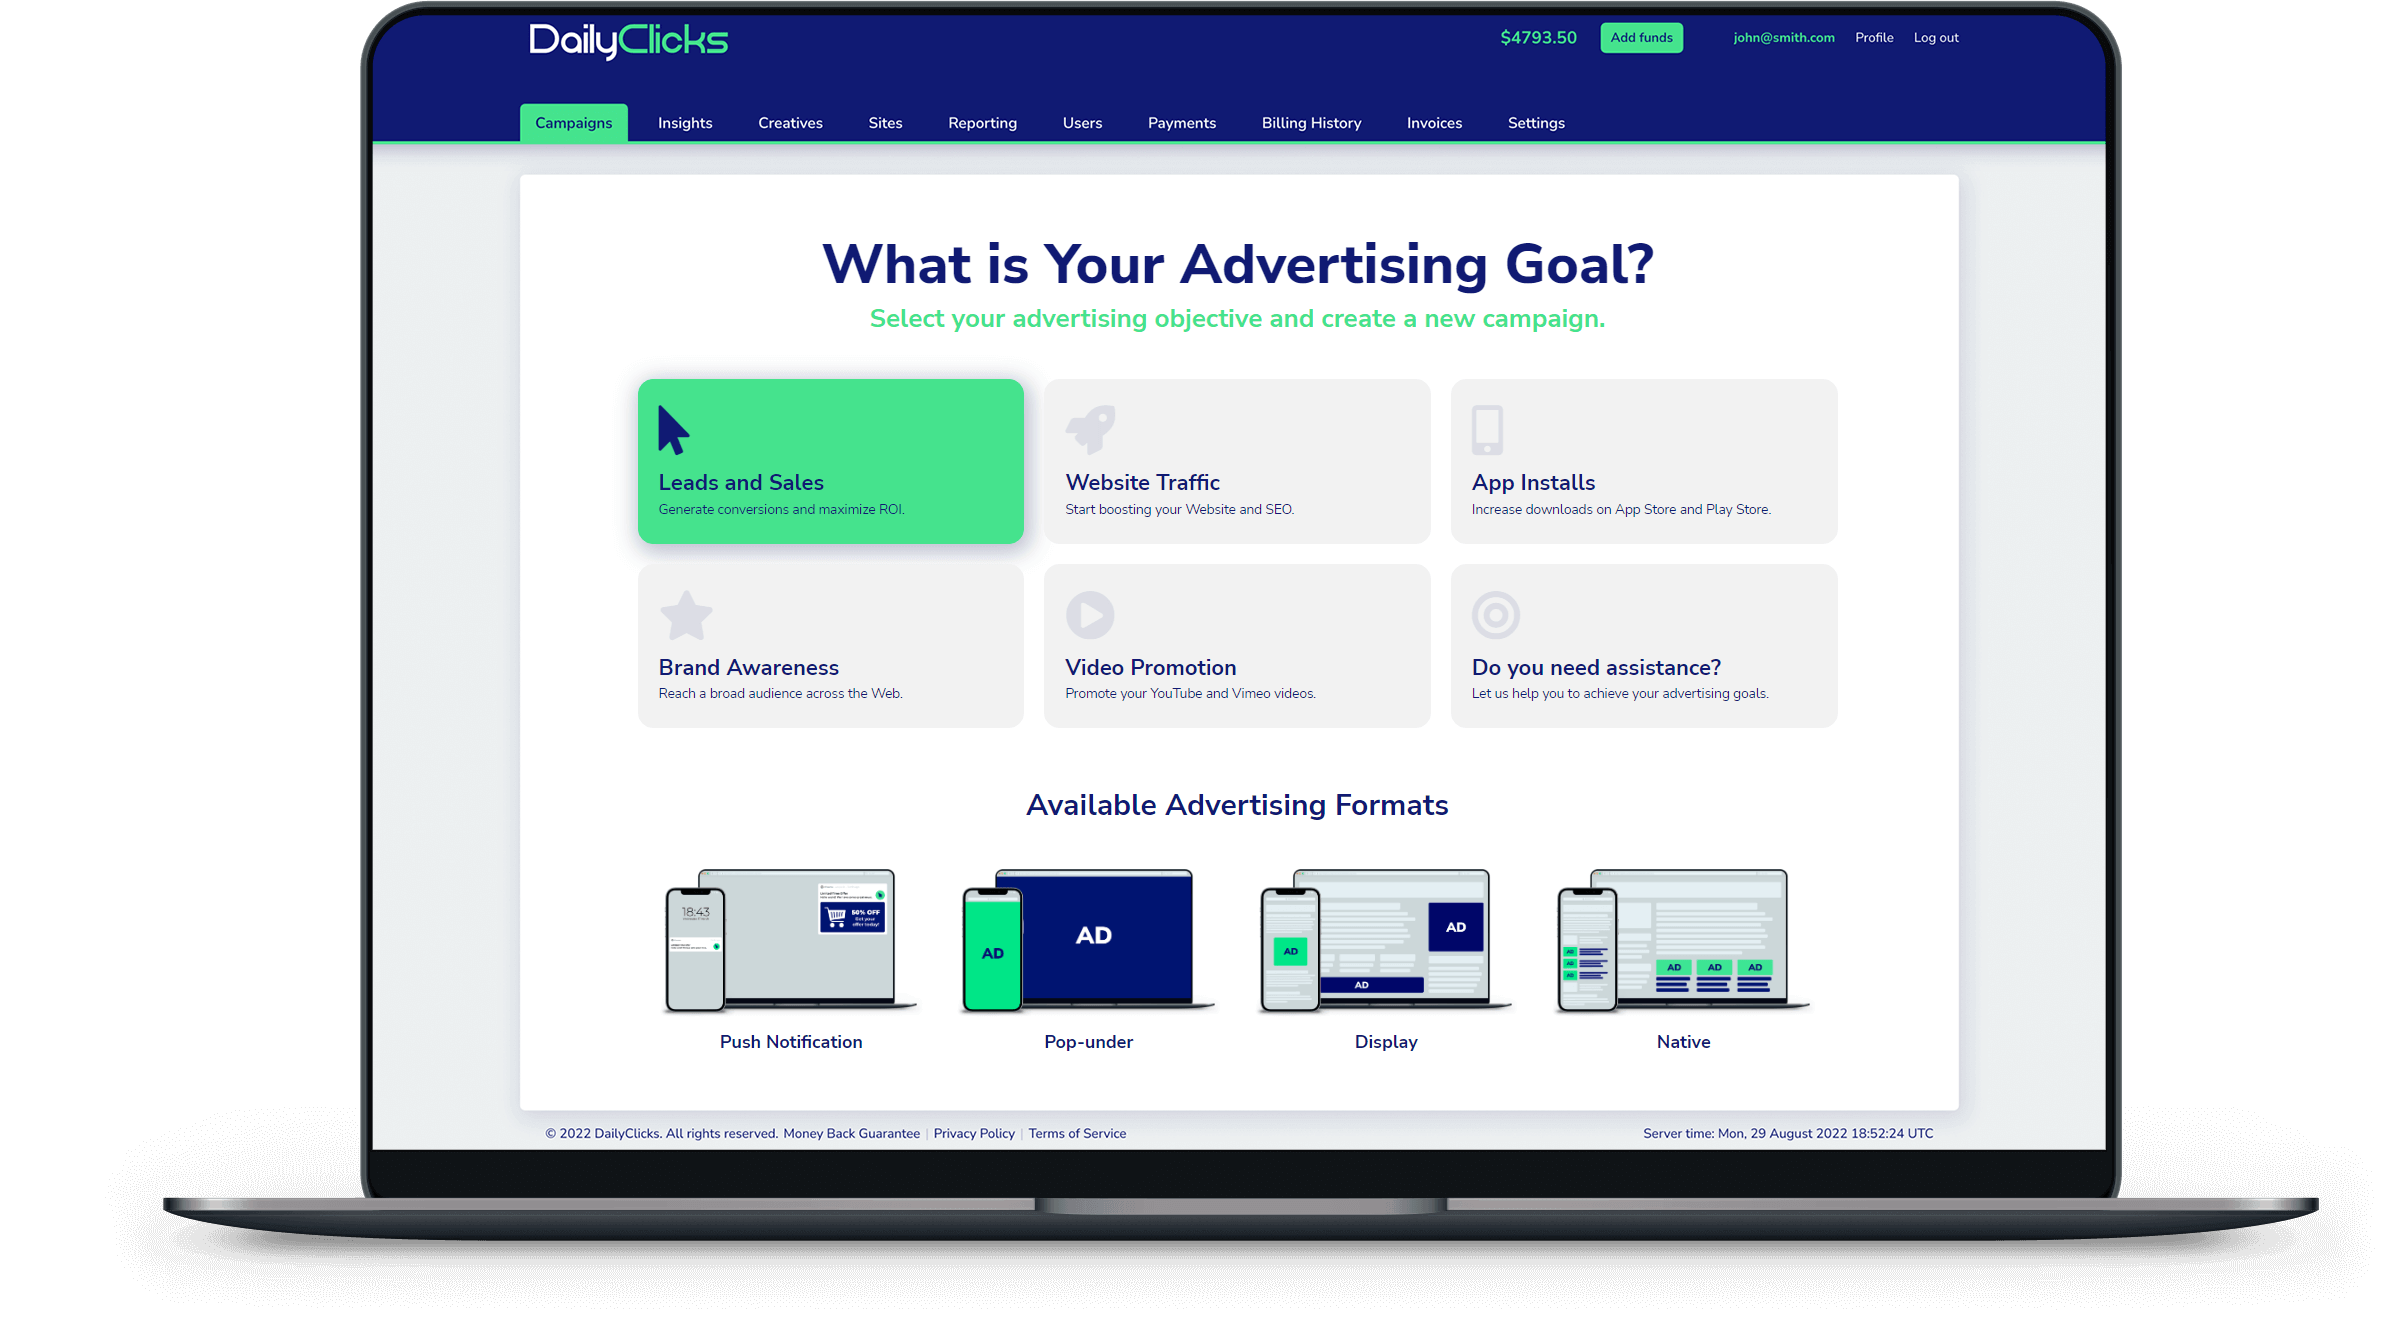 What is Your Advertising Goal?